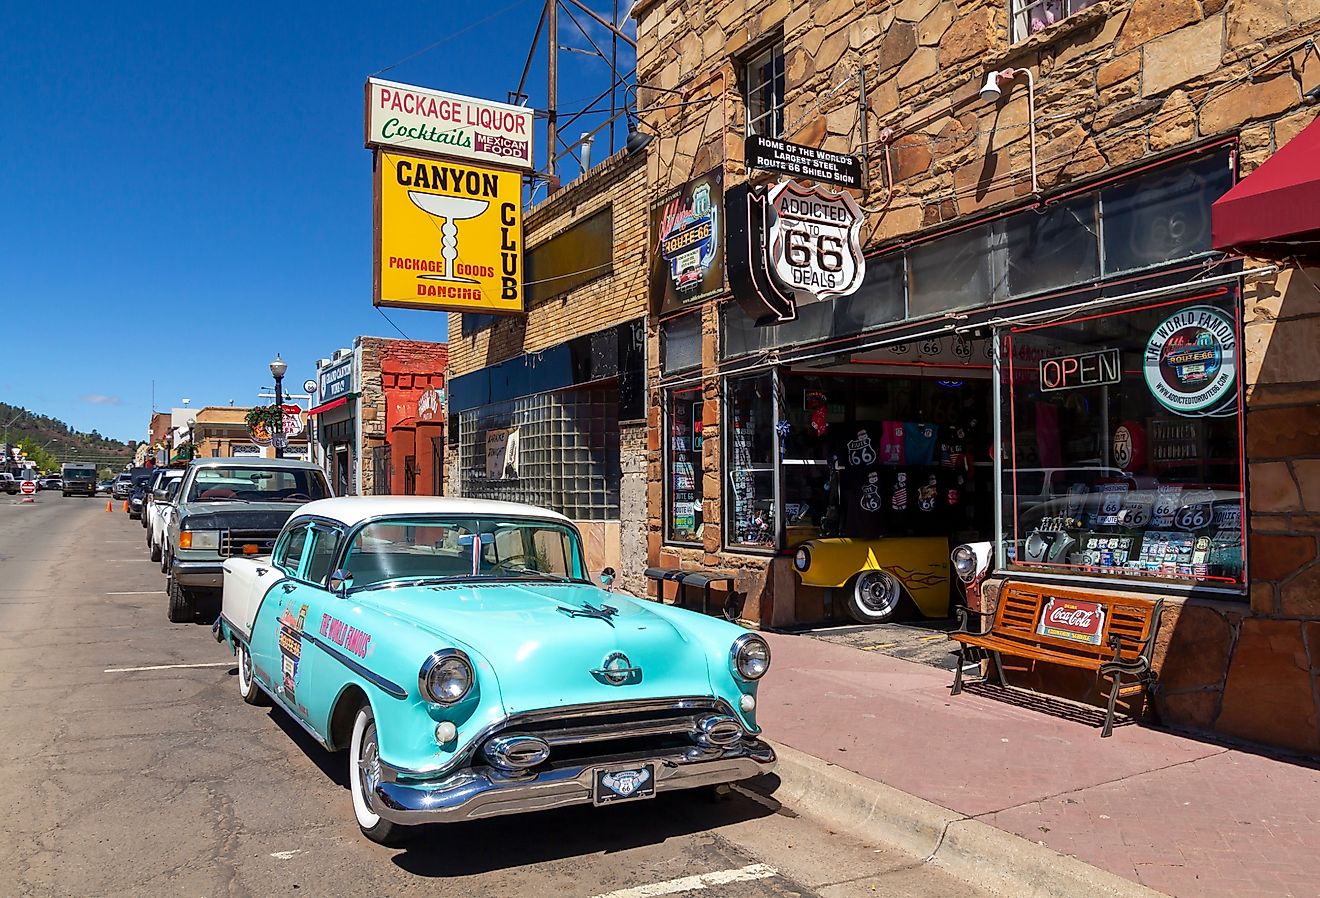 Street scene with classic car in front of souvenir shops in Williams, one of the cities on the famous route 66. Image credit Jordi C via Shutterstock.